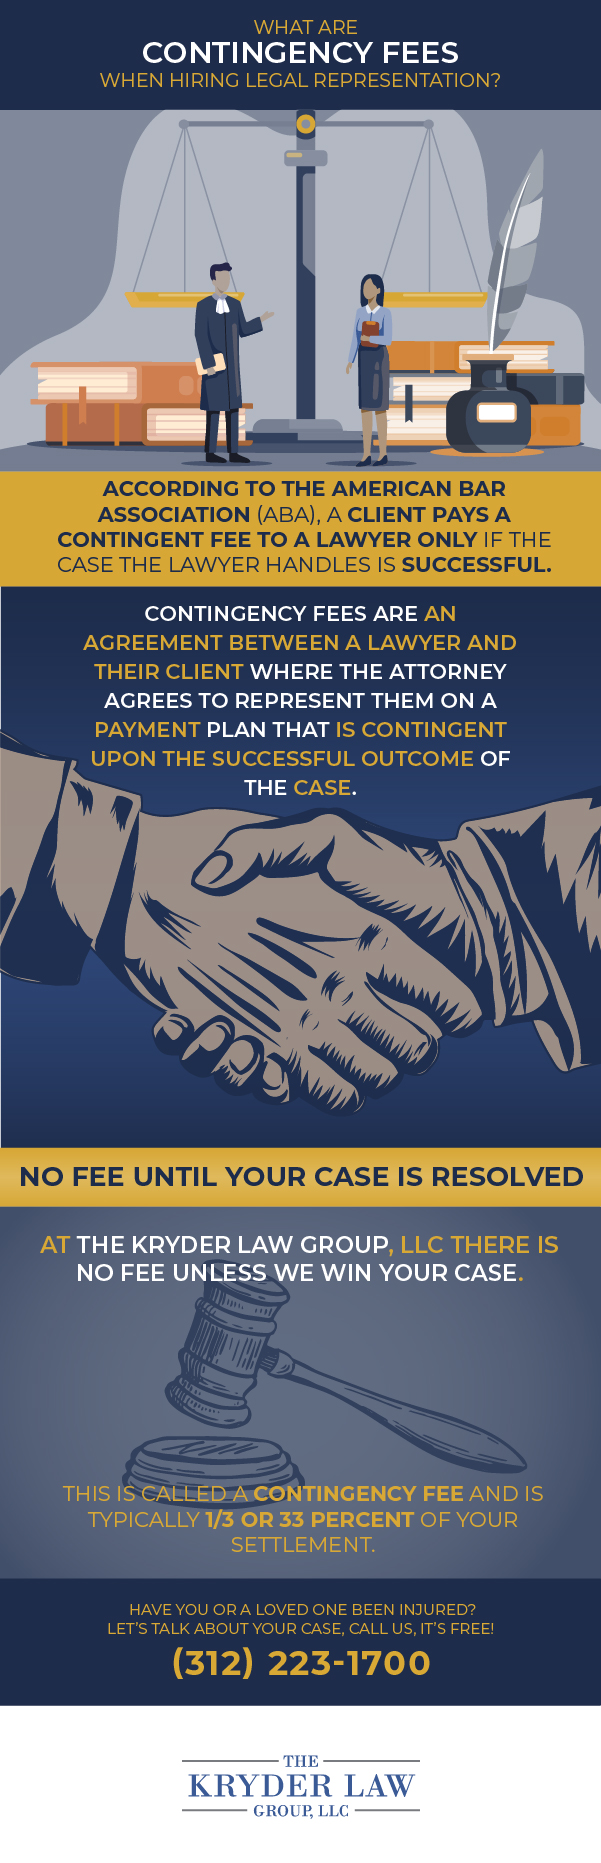 What Are Contingency Fees When Hiring Legal Representation?